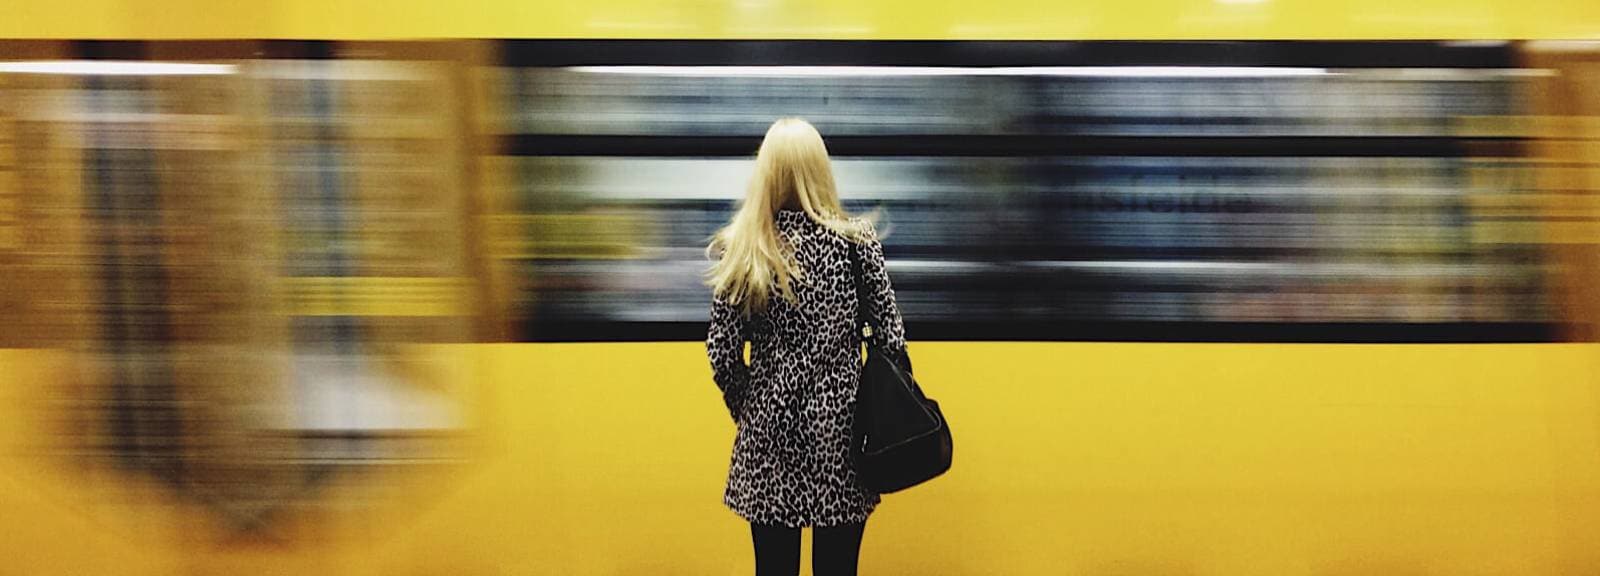 woman waiting for train